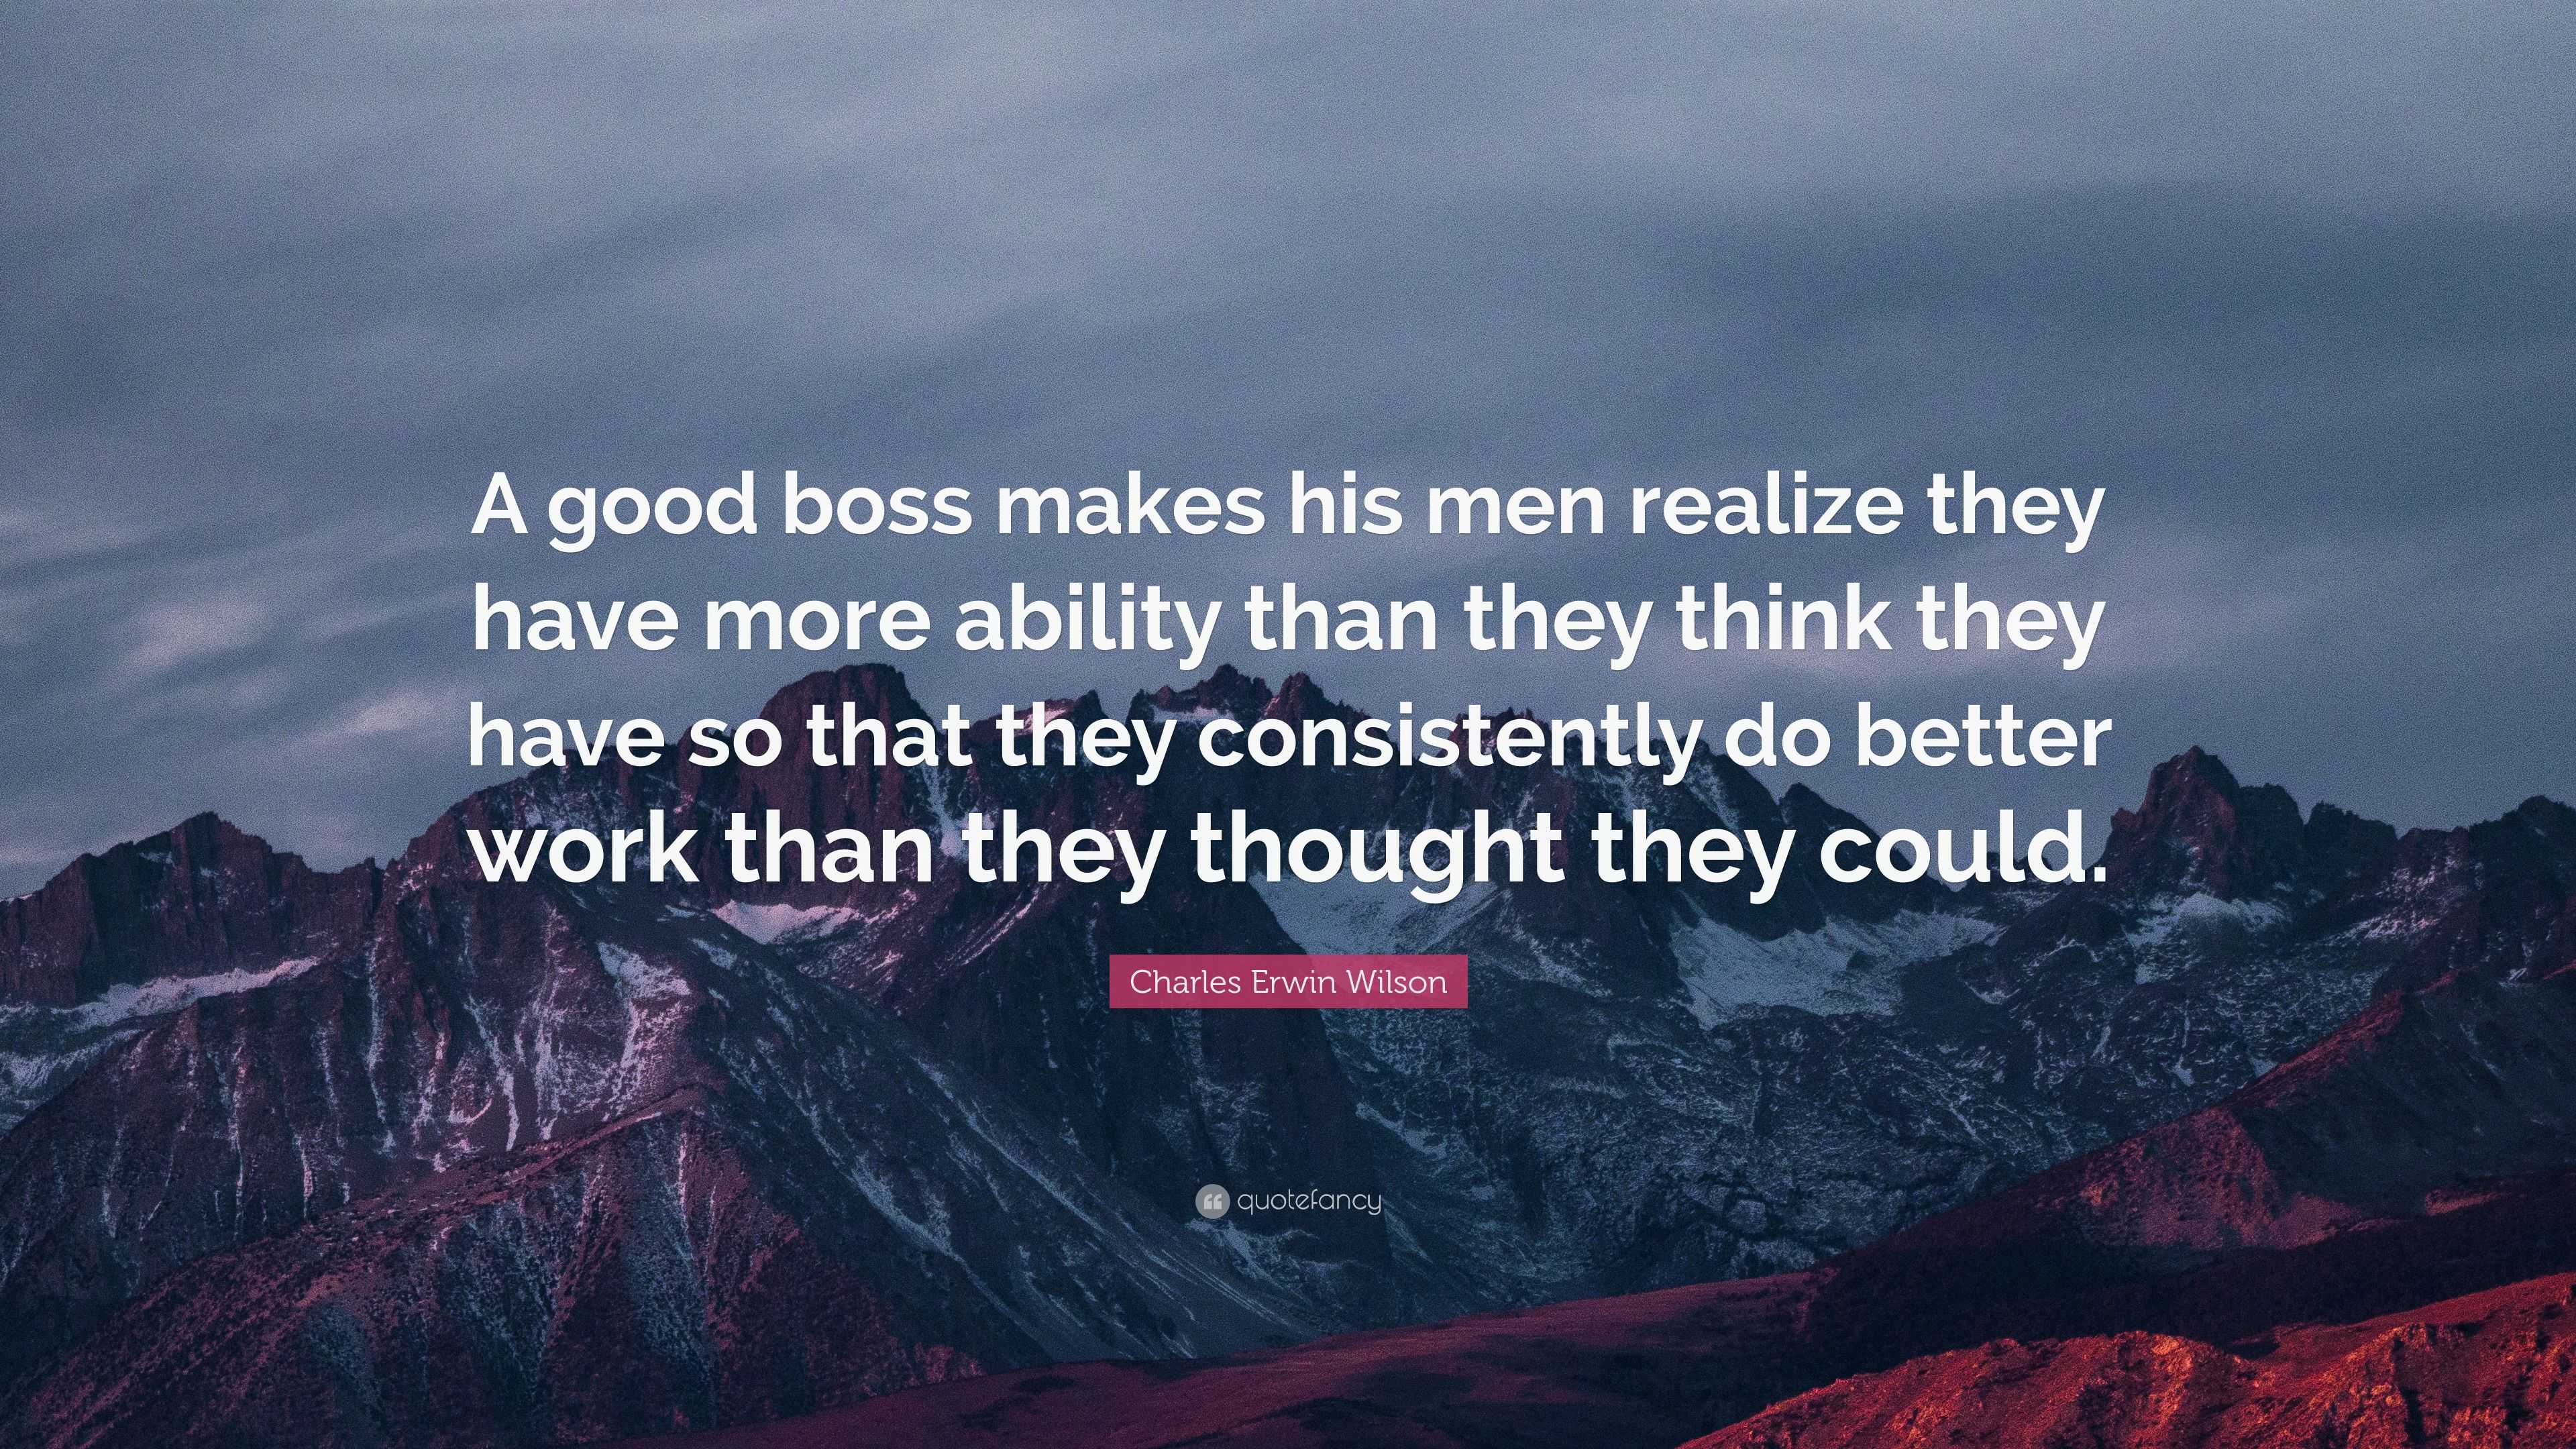 Charles Erwin Wilson Quote: “A good boss makes his men realize they